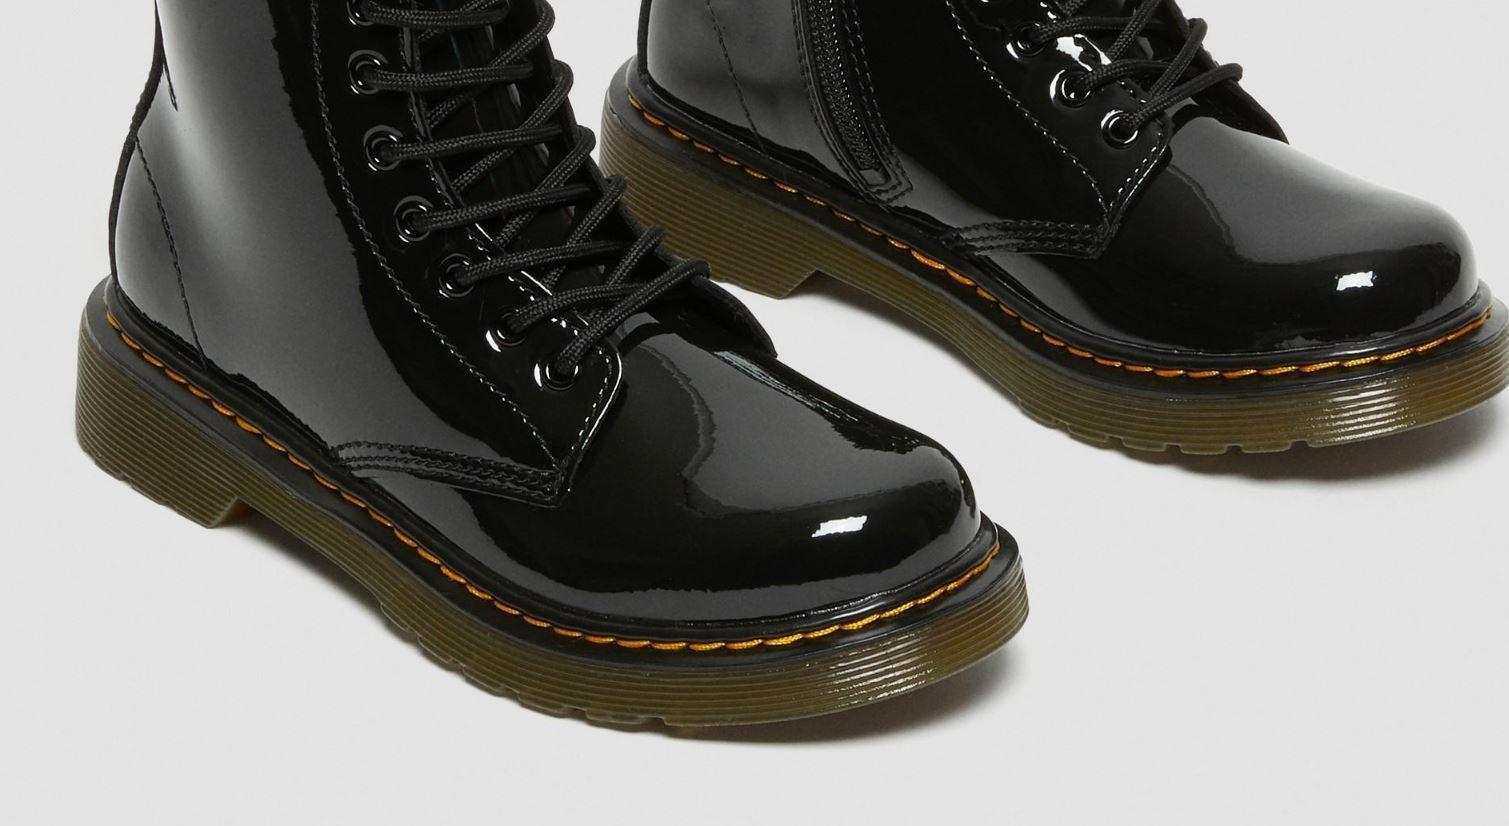 Patent Leather from Dr Martens